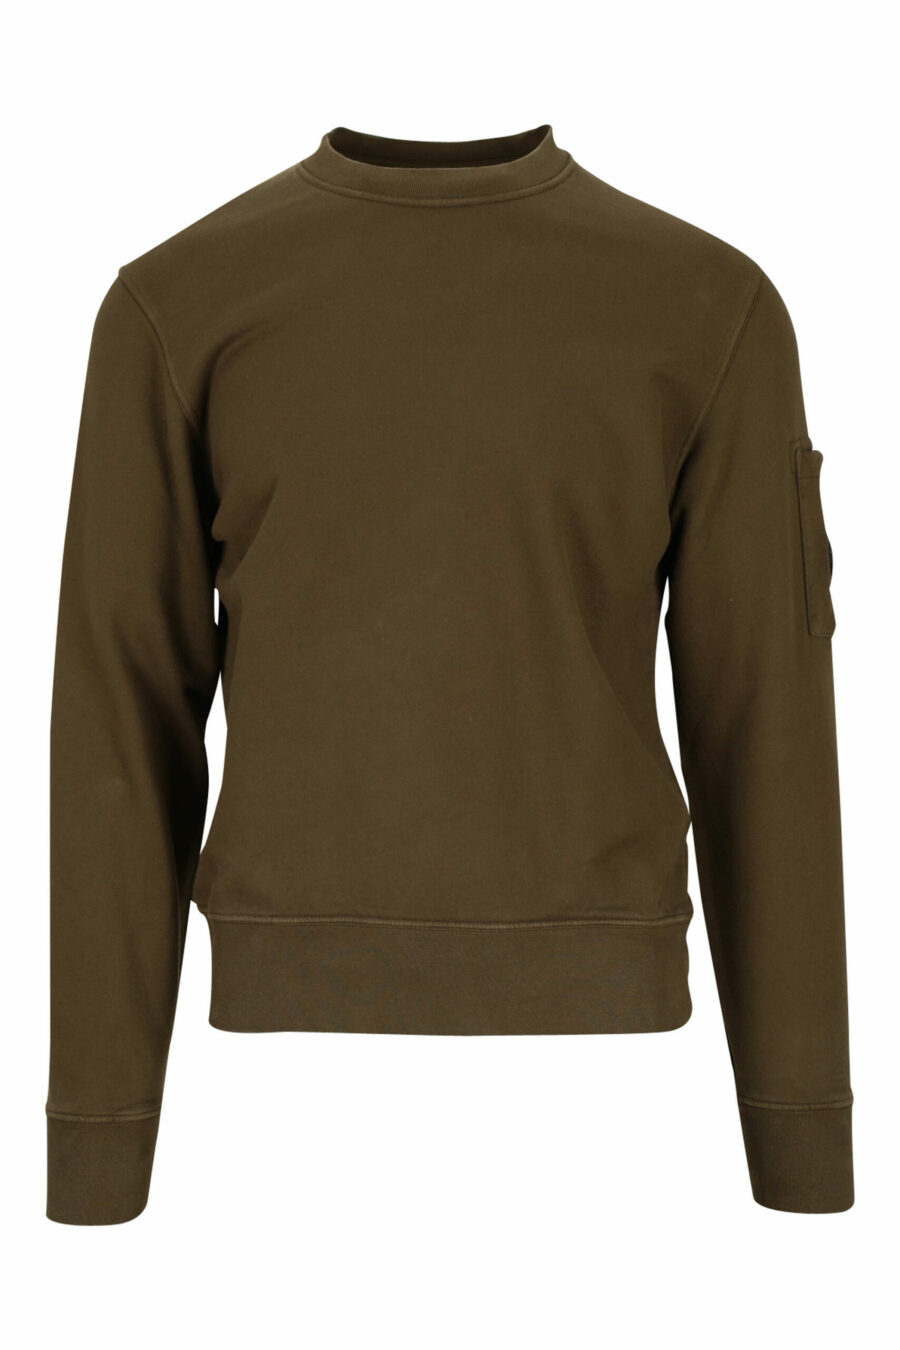 Military green sweatshirt with side logo lens - 7620943598582 scaled